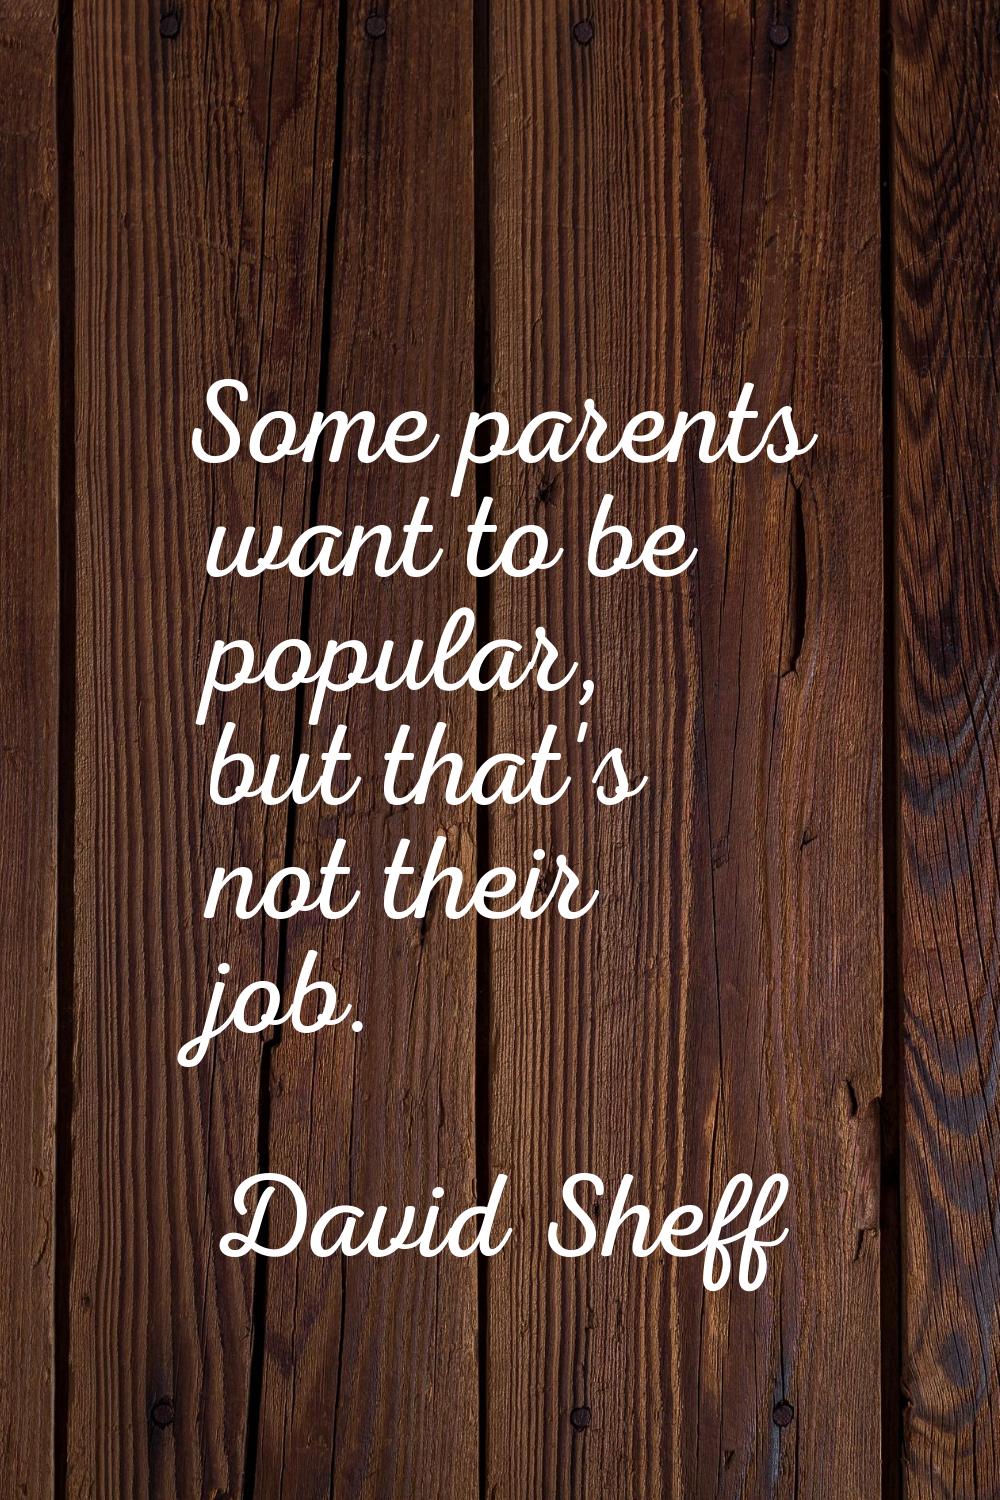 Some parents want to be popular, but that's not their job.